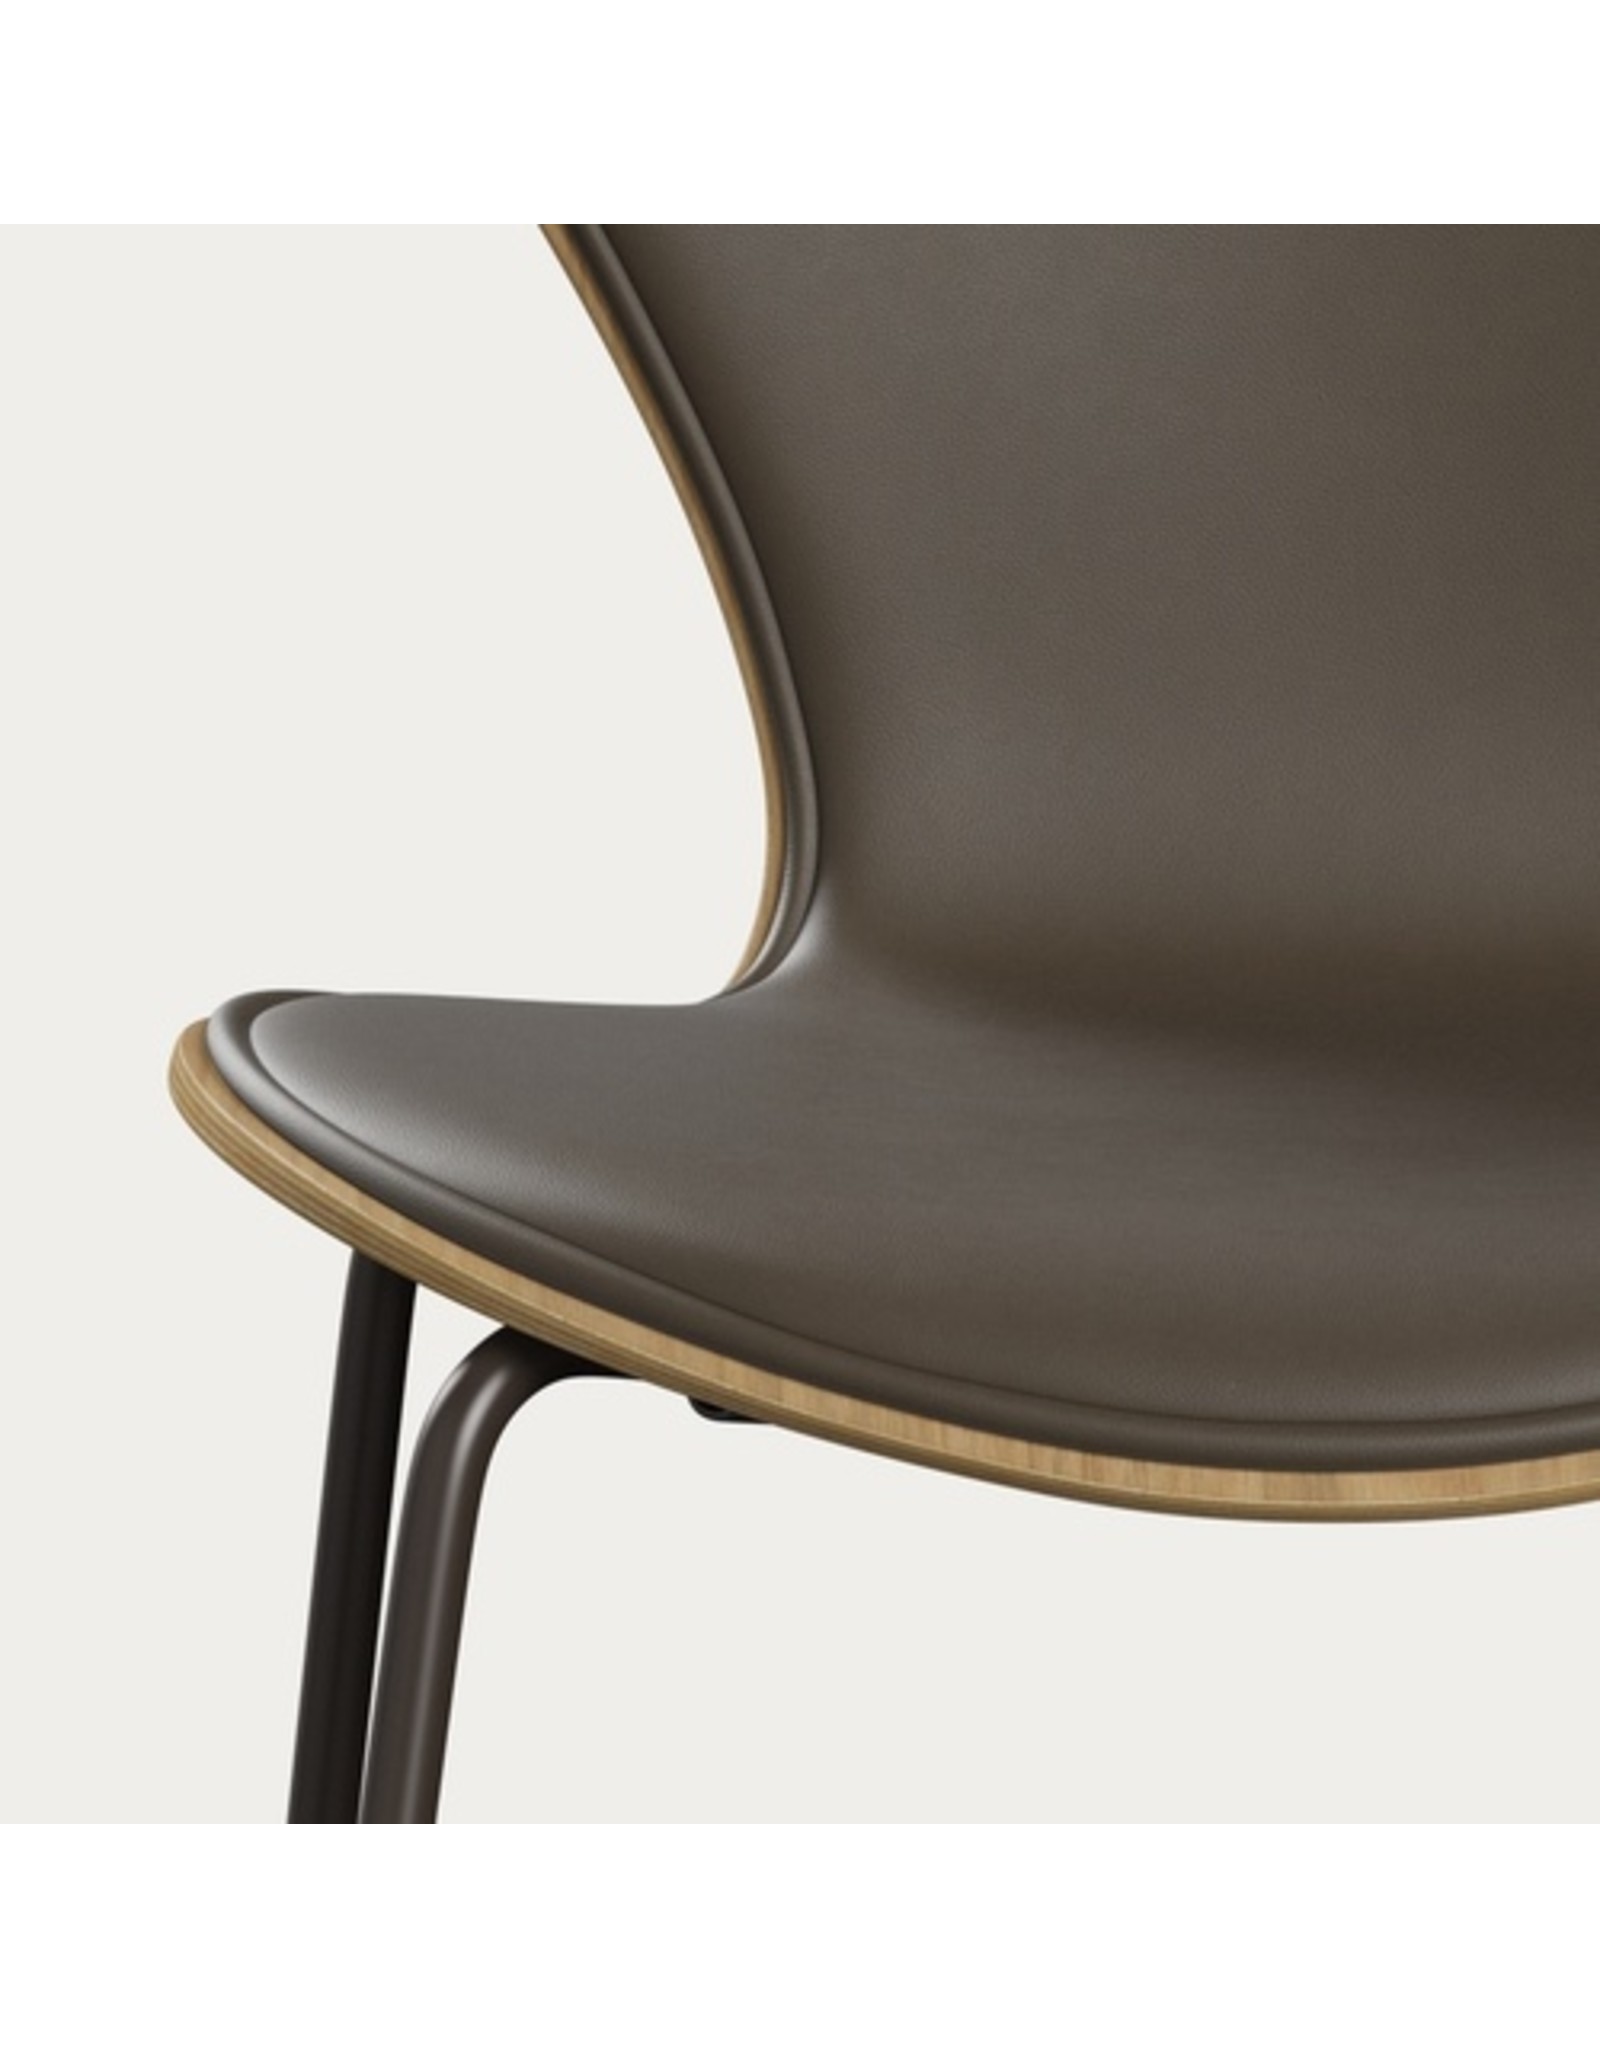 3107 SERIES 7 CHAIR, FRONT UPHOLSTERED IN LEATHER, BASE IN BROWN BRONZE